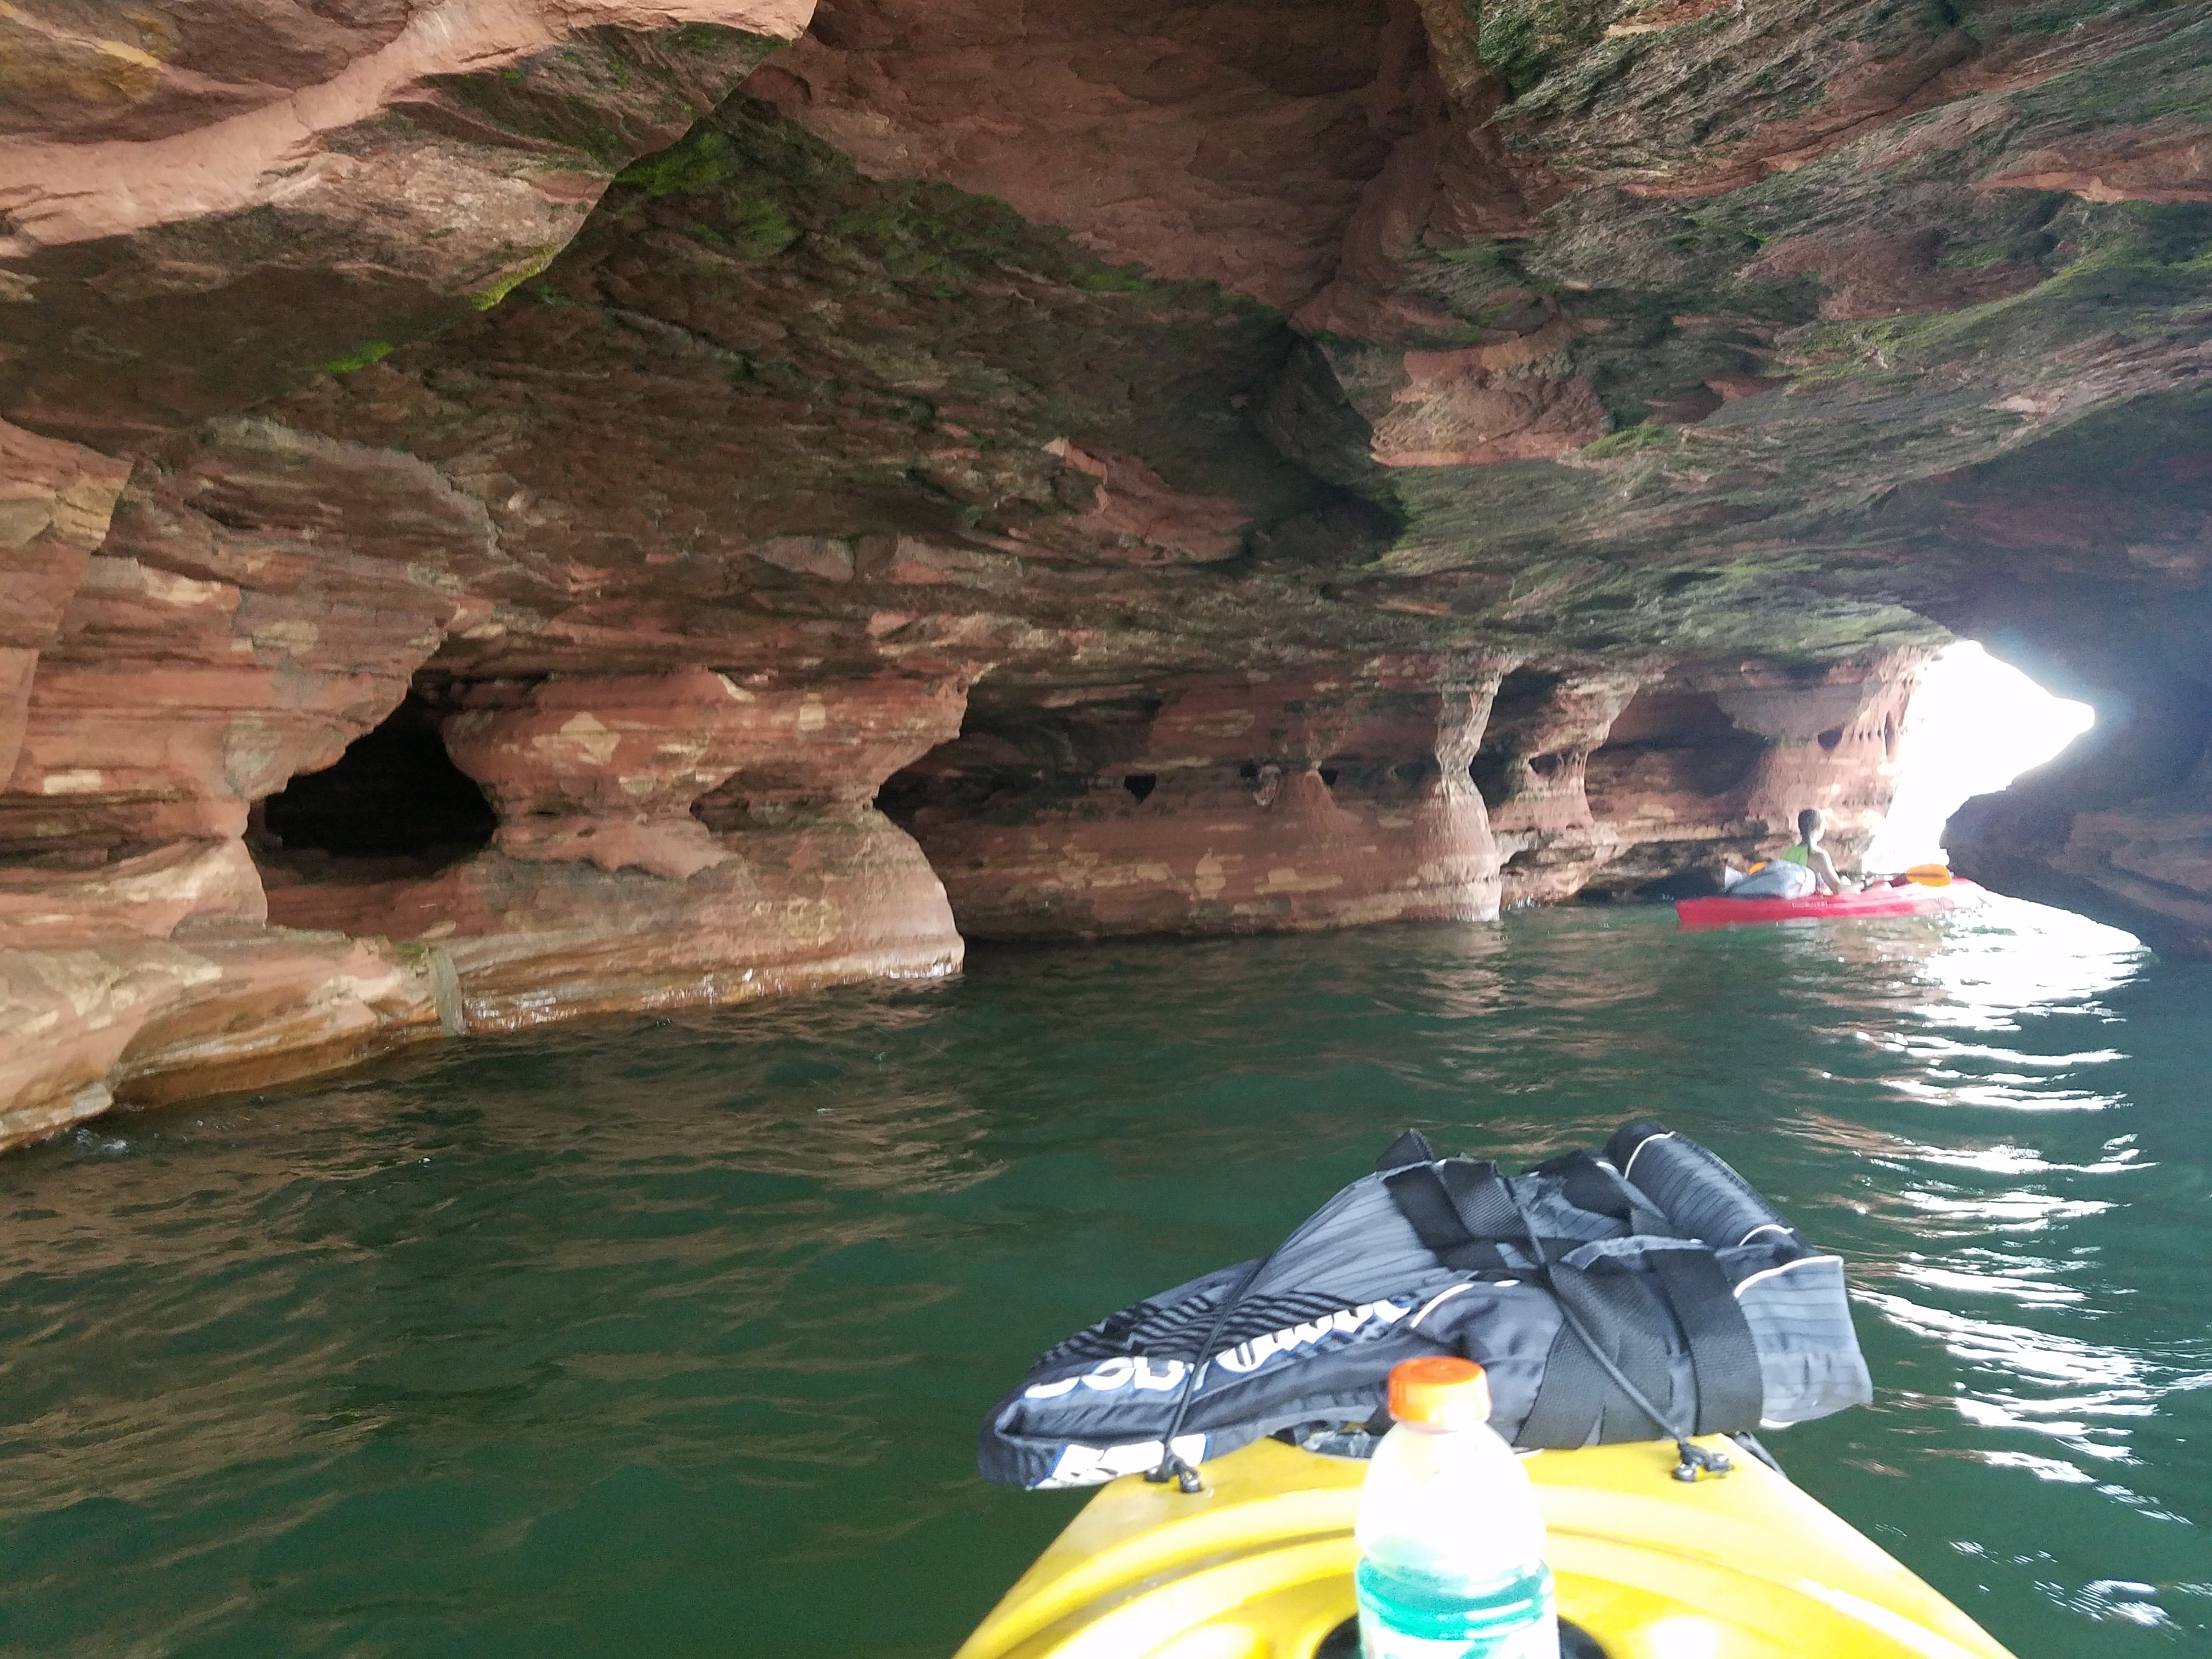 You can kayak under the caves as you head to the camp site. It's so amazing!